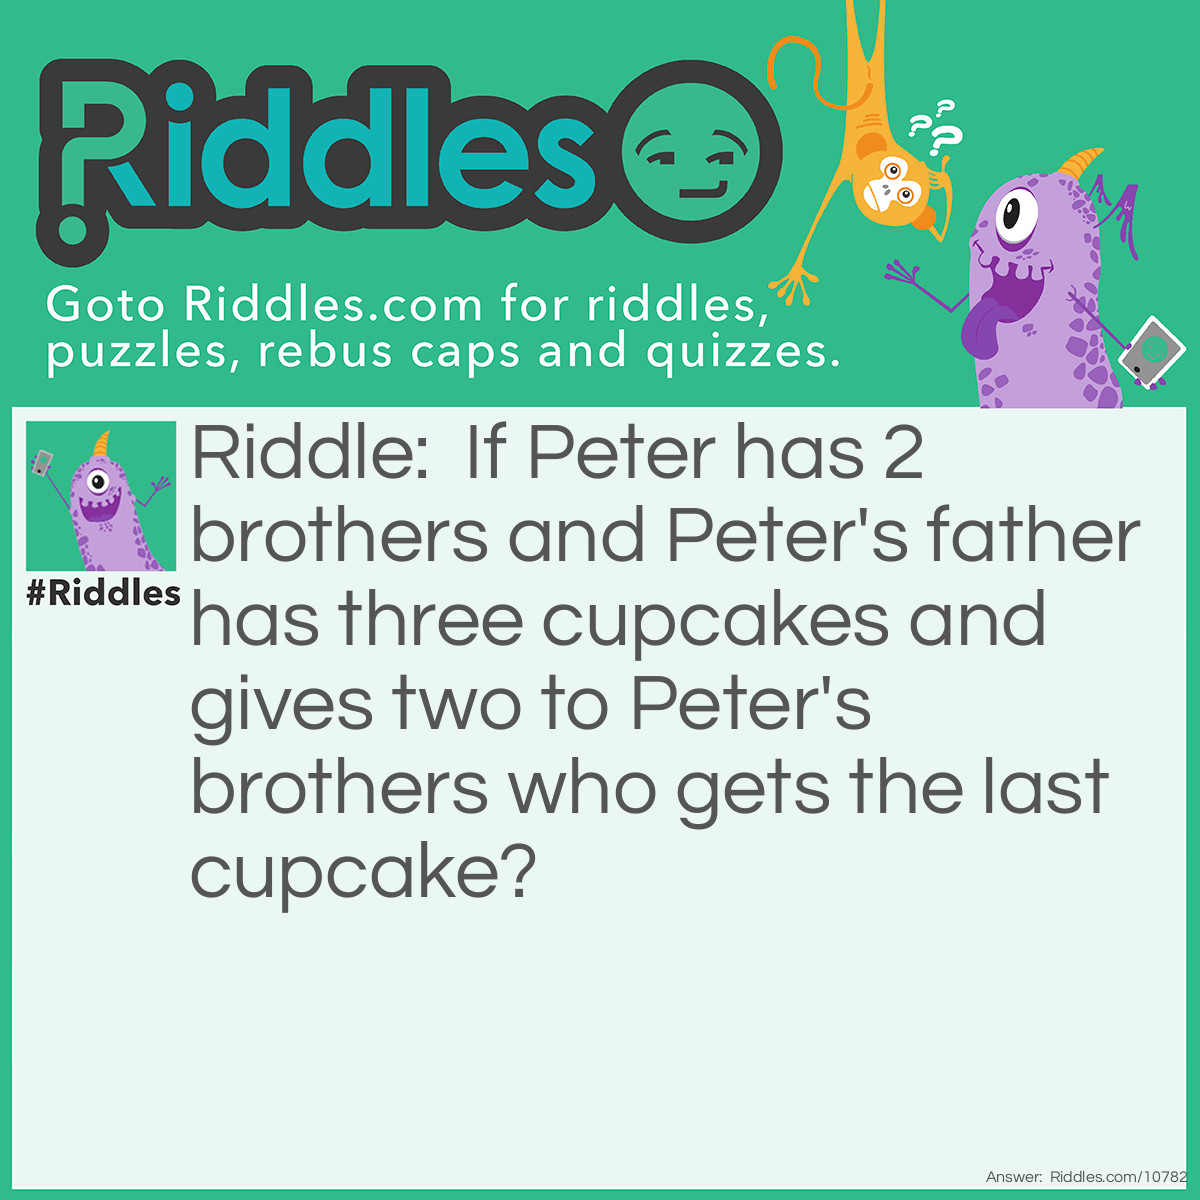 Riddle: If Peter has 2 brothers and Peter's father has three cupcakes and gives two to Peter's brothers who gets the last cupcake? Answer: Peter.